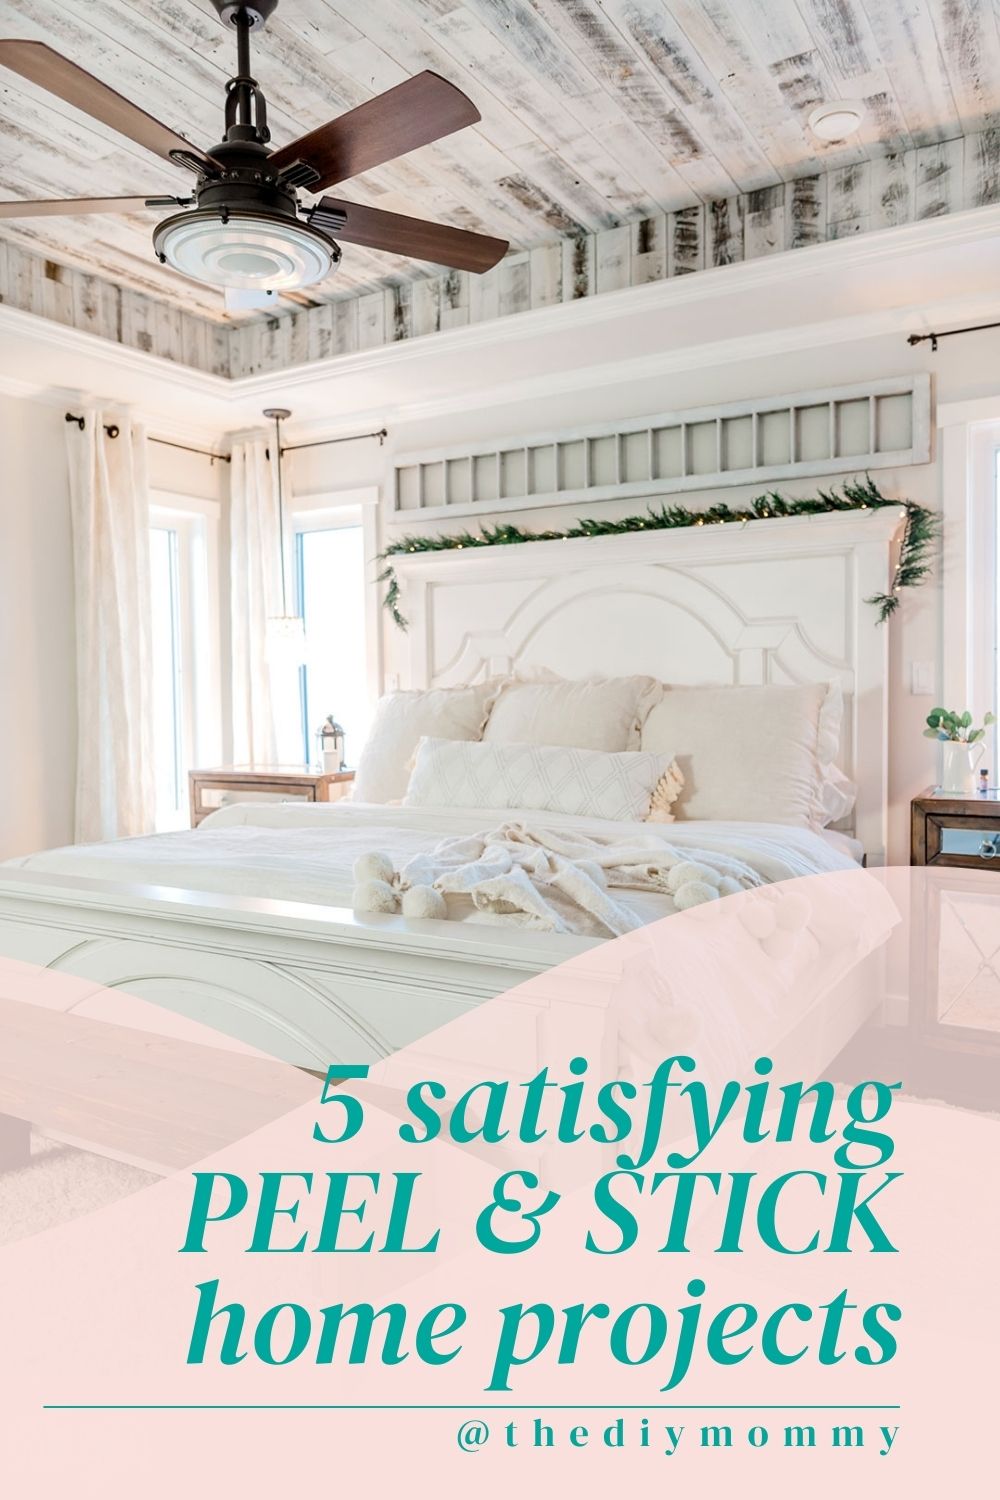 These 5 peel & stick projects can make your home look amazing!